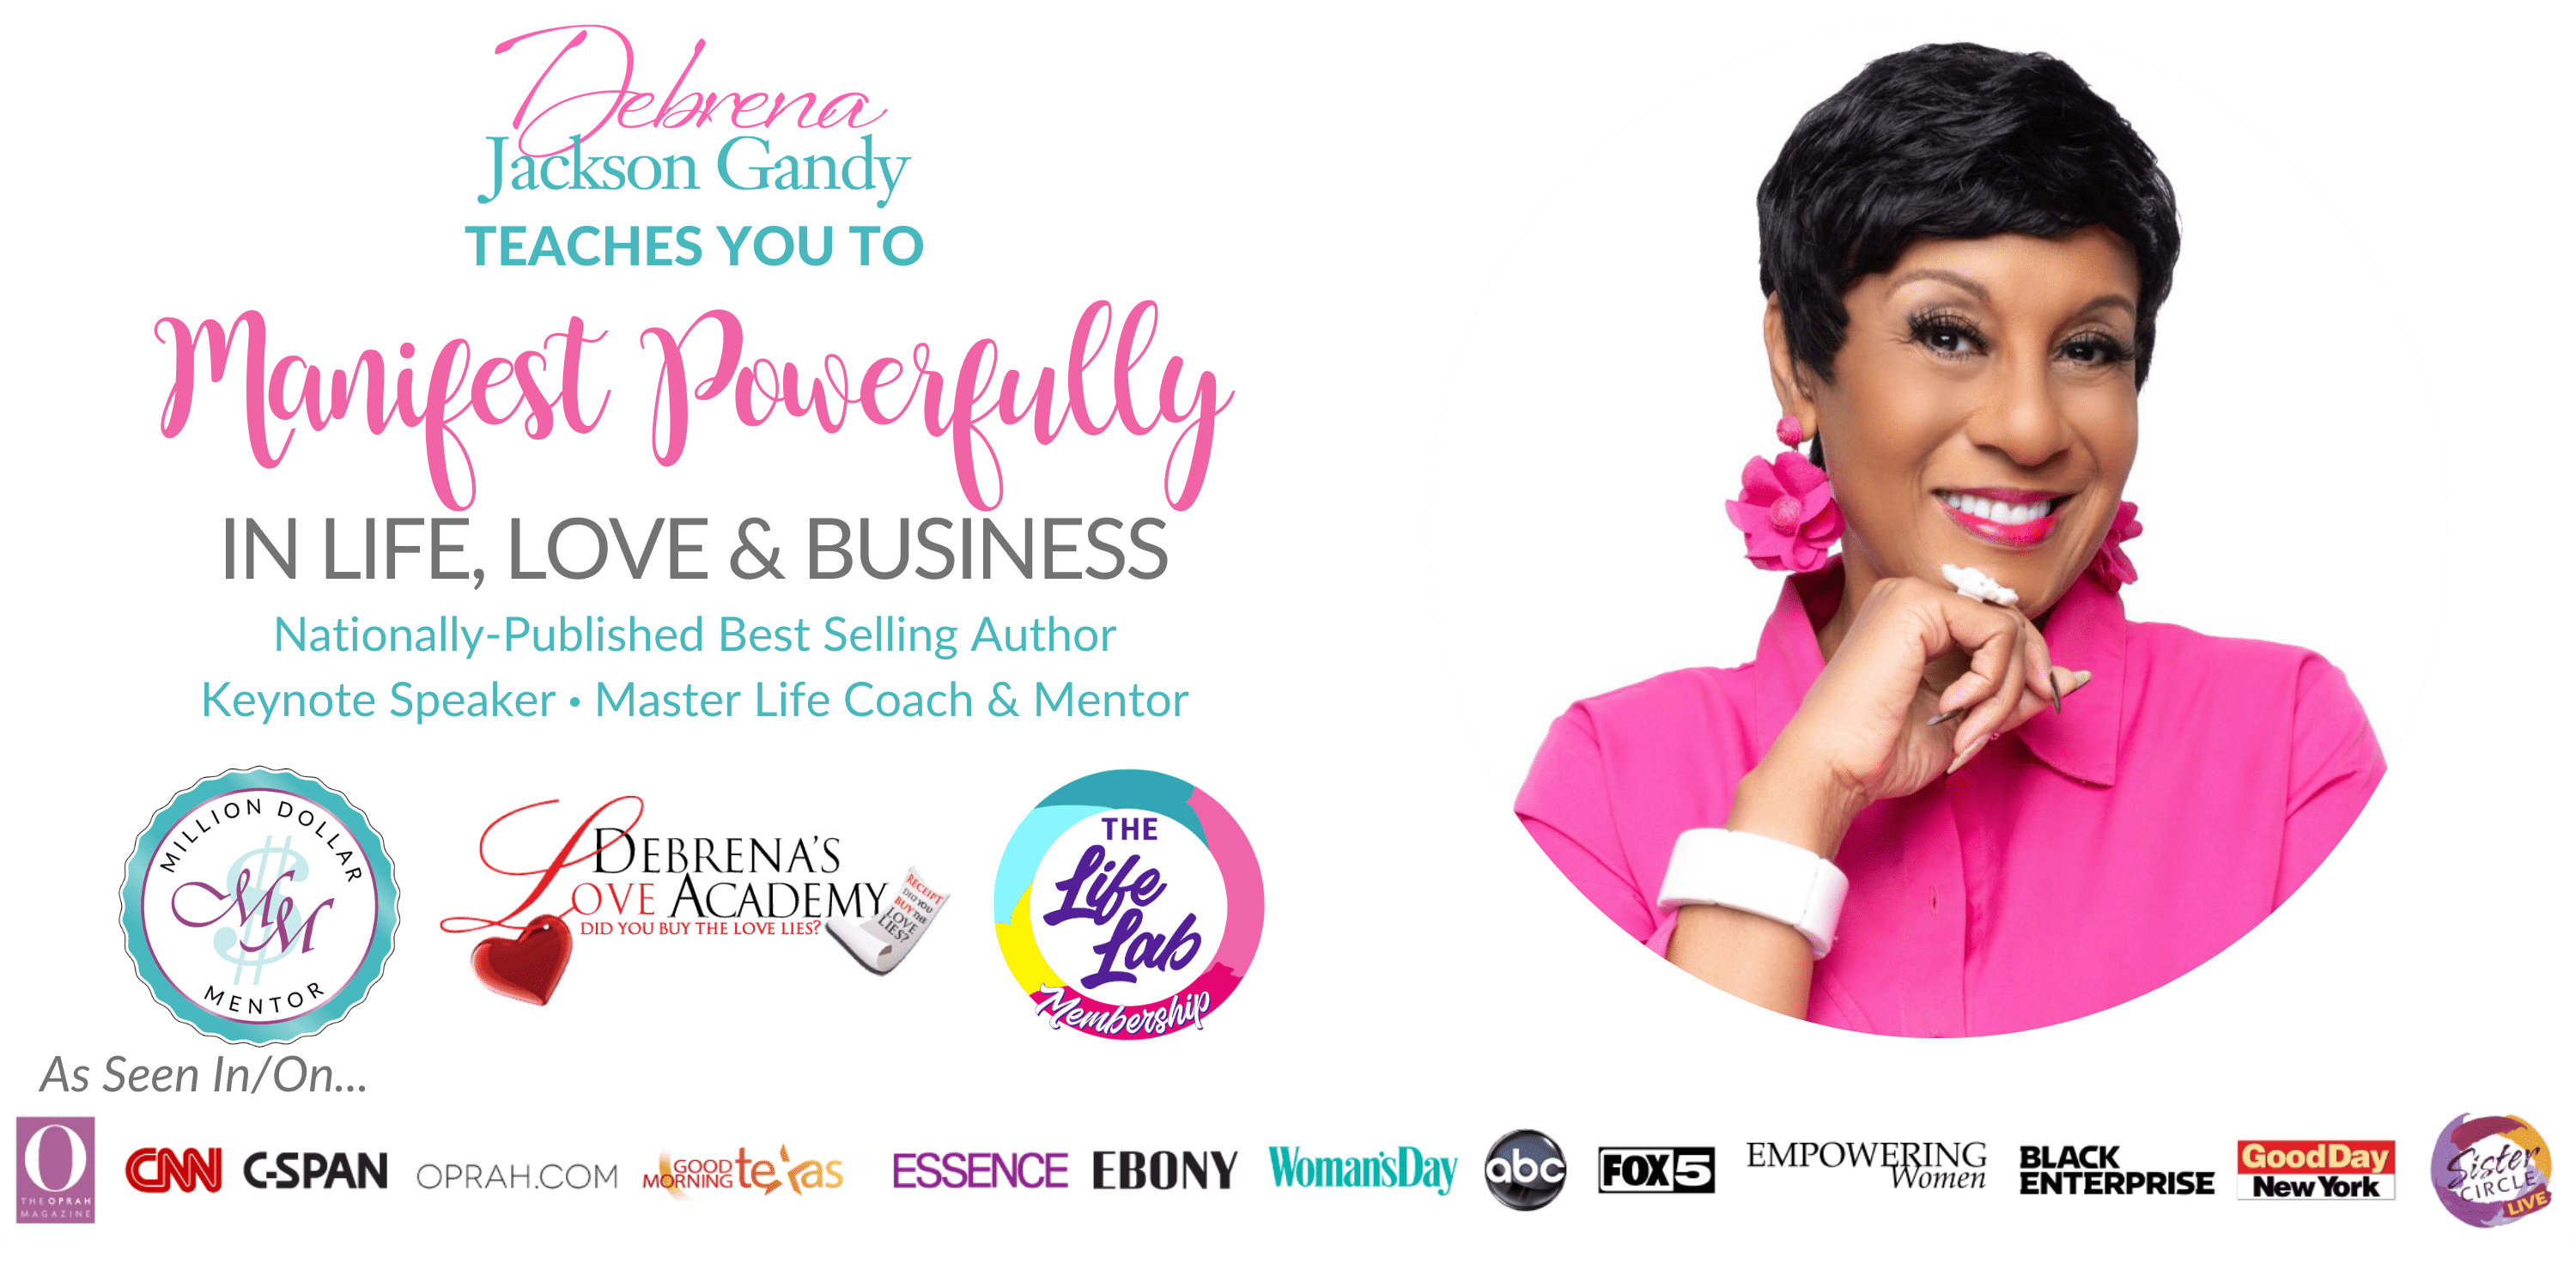 Debrena Jackson Gandy teaches you to MANIFEST POWERFULLY in Life, Love & Business